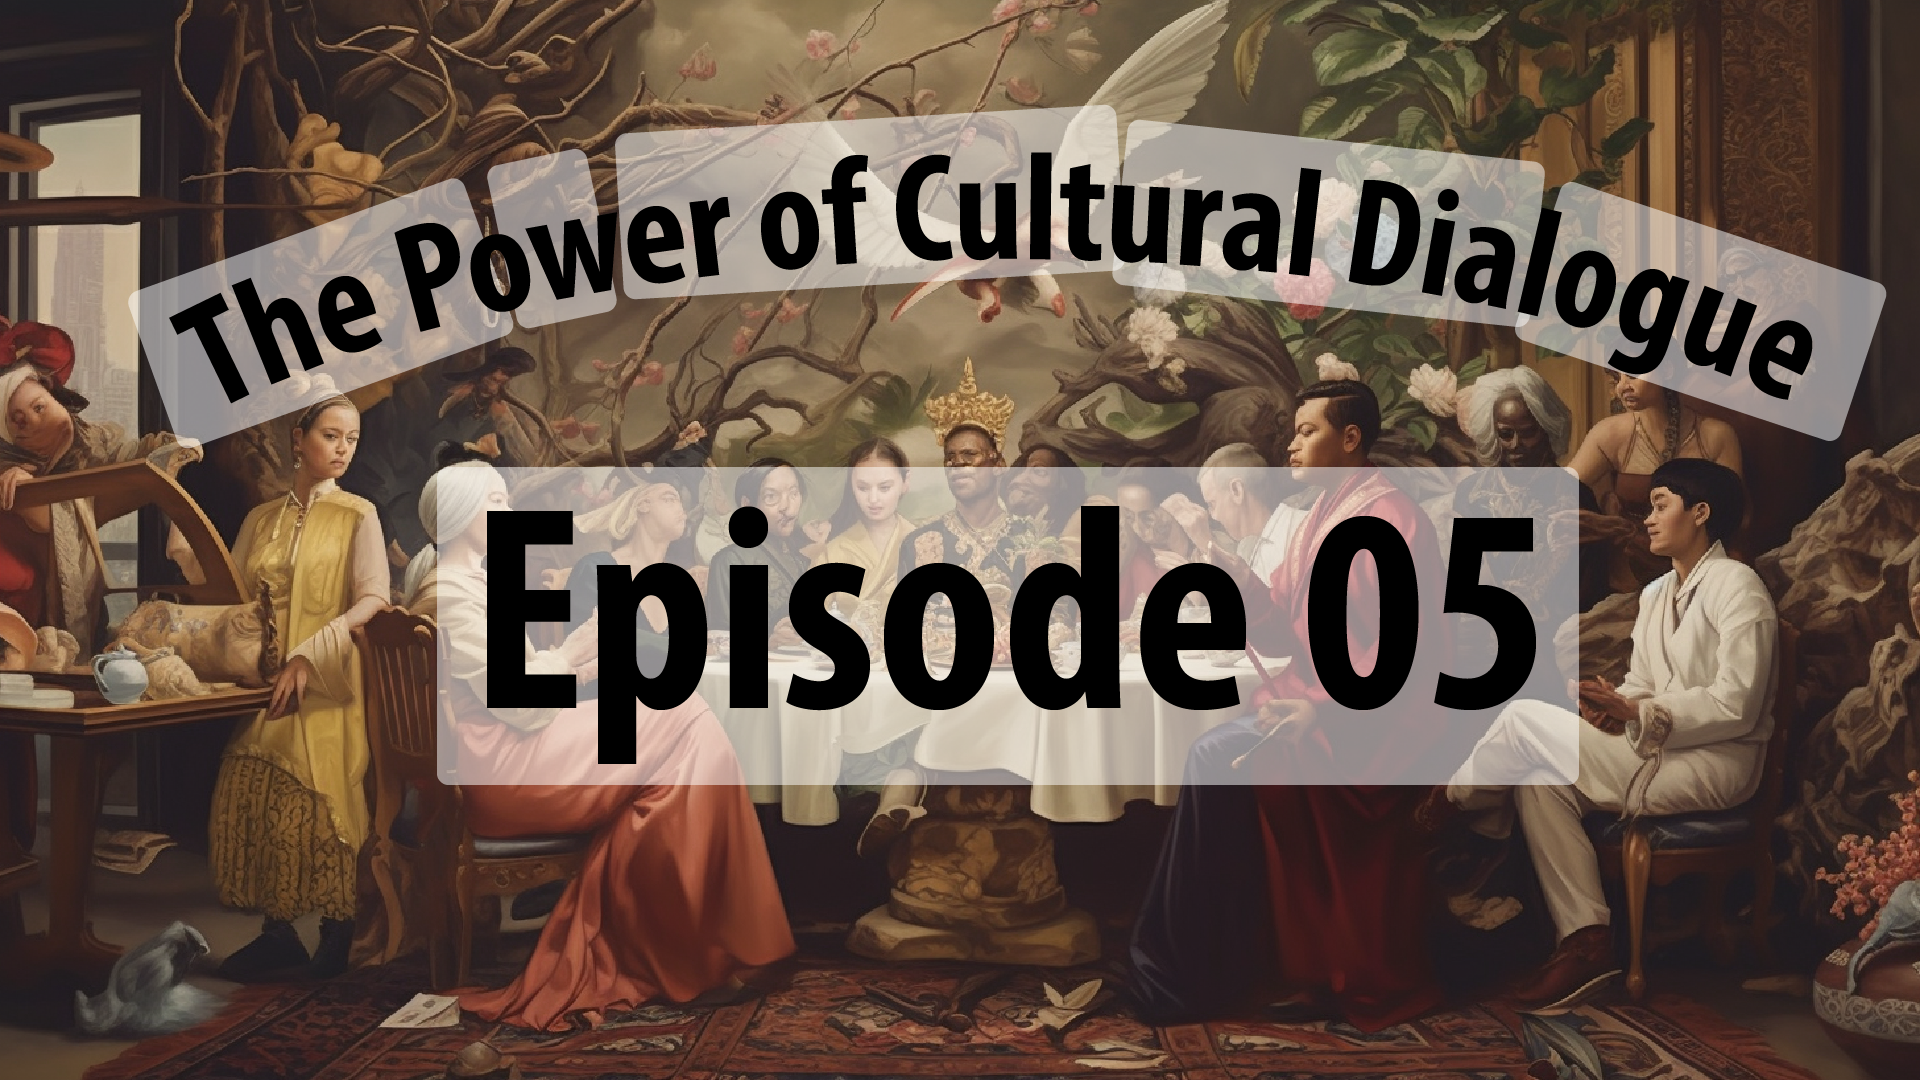 The Power of Cultural Dialogue